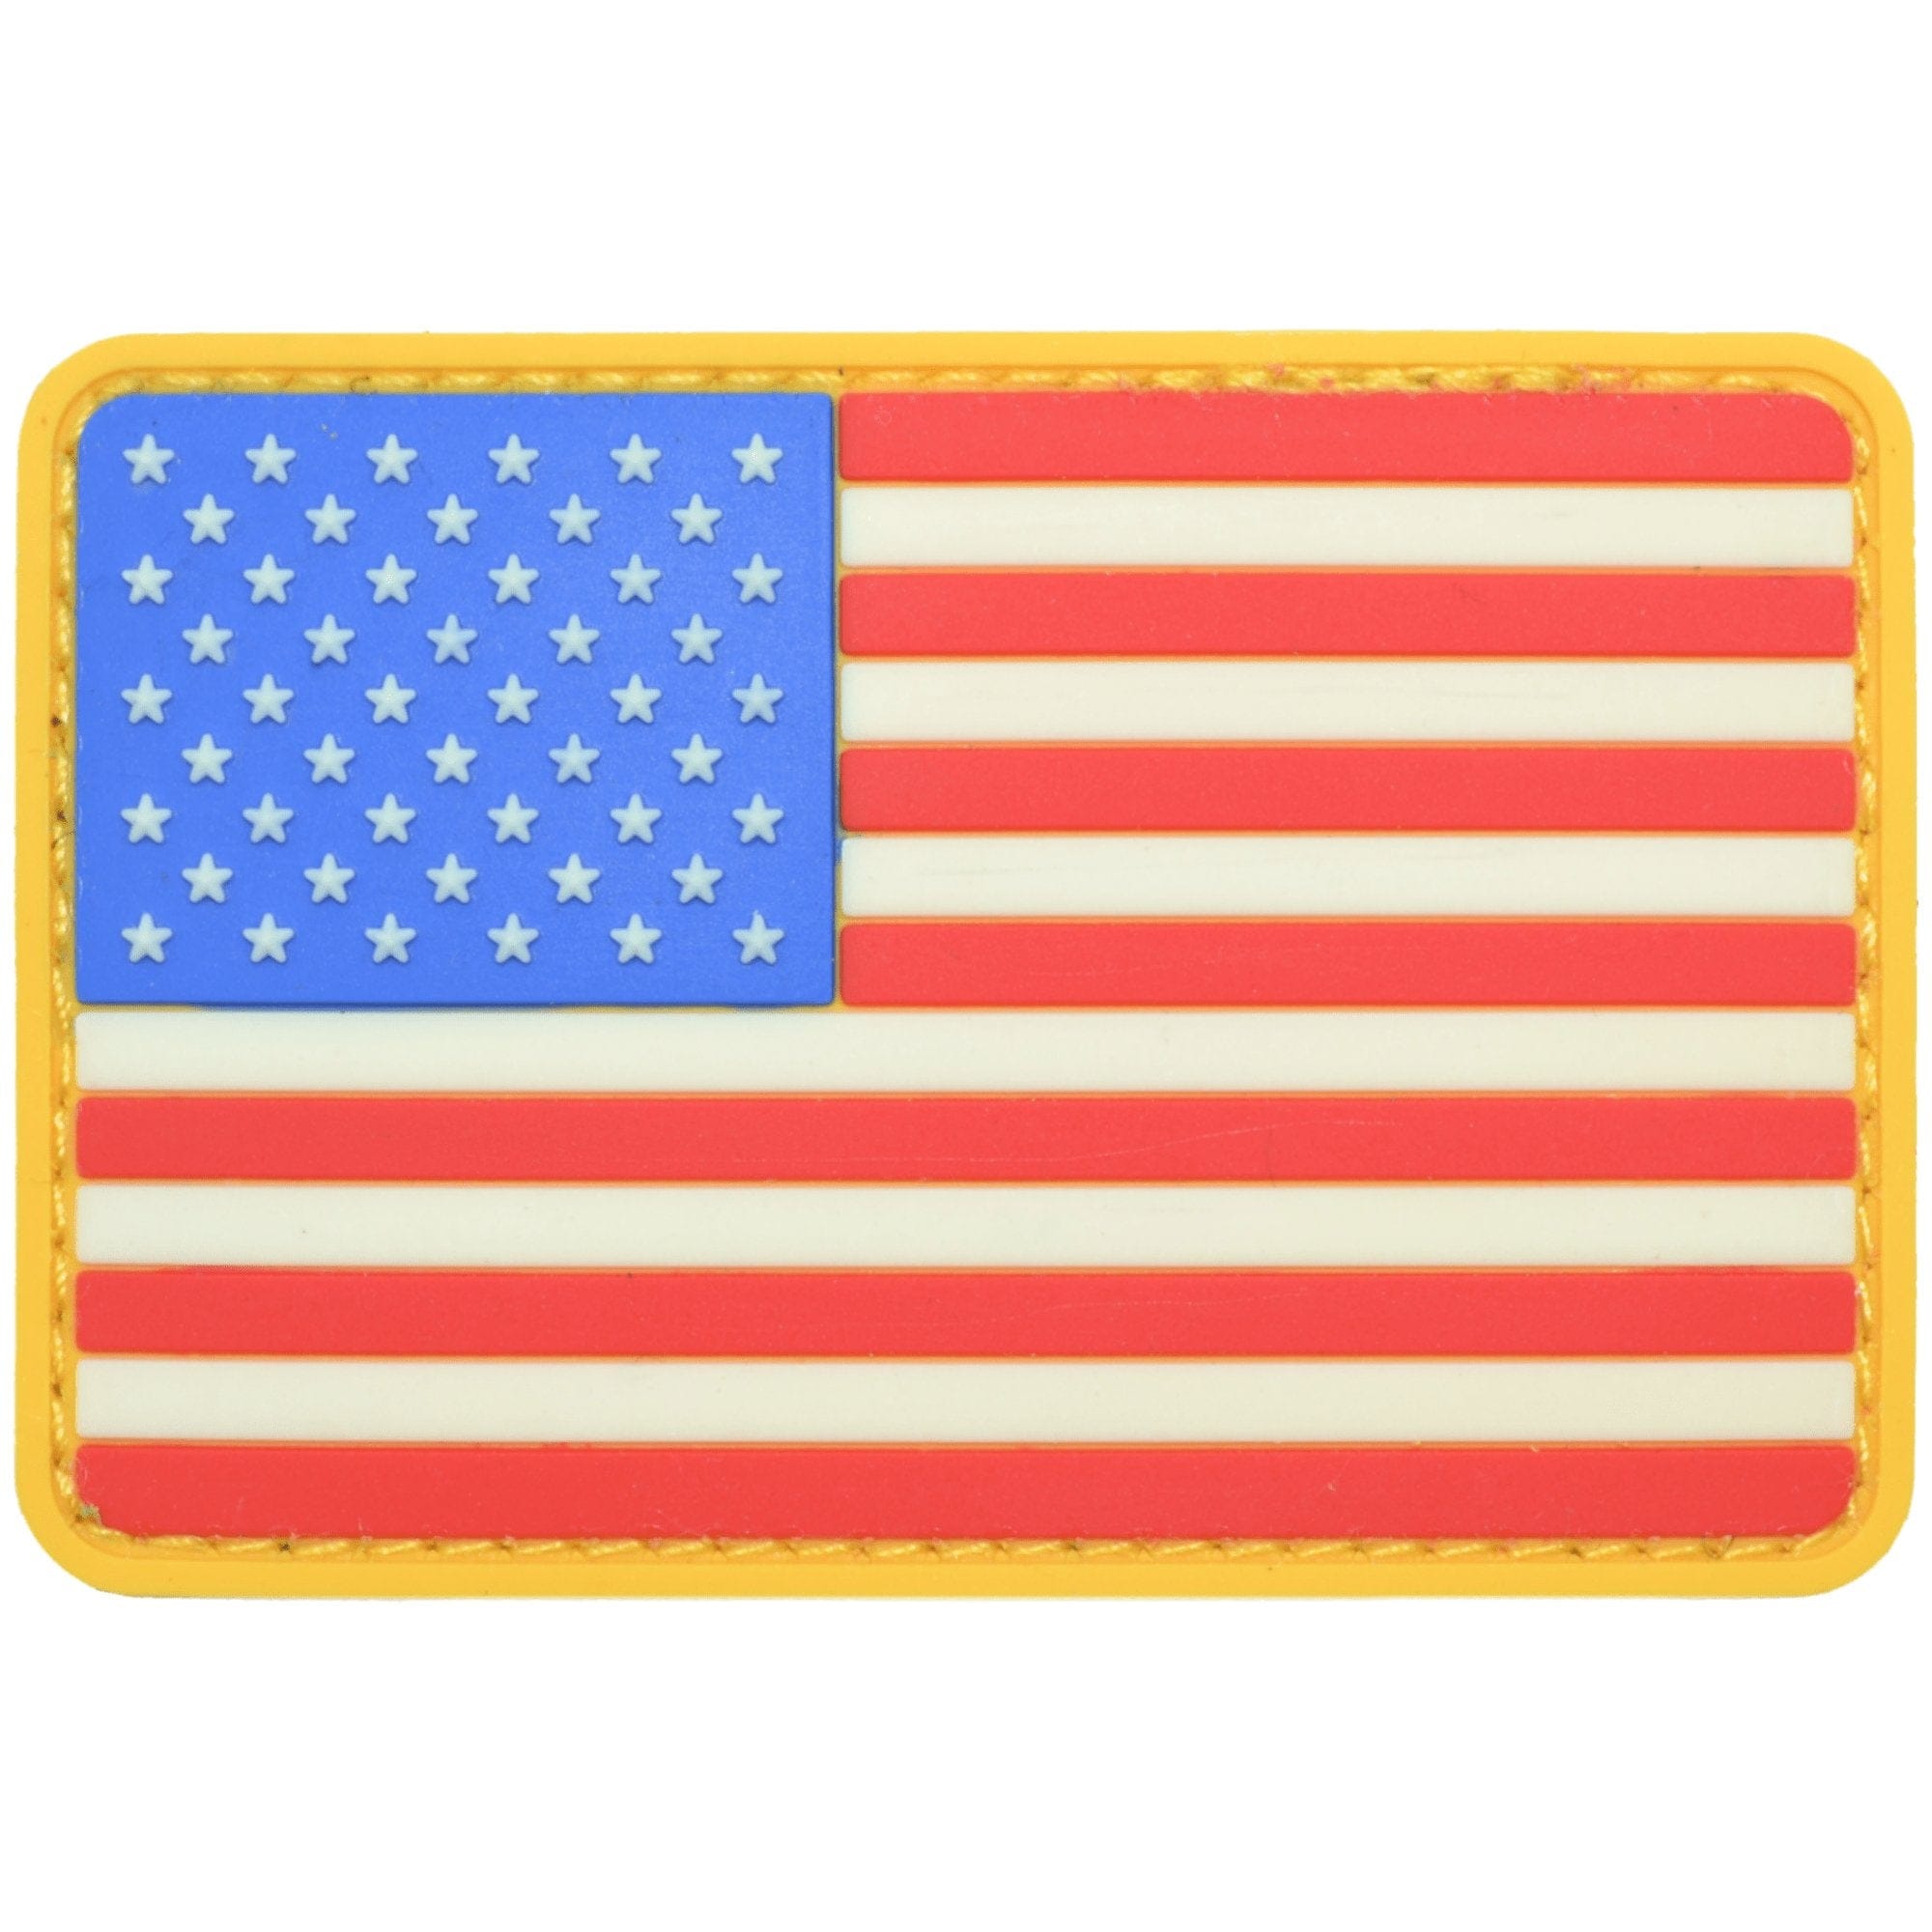 Tactical Gear Junkie Patches Glow in the Dark USA Flag Full Color - 2x3 PVC Patch